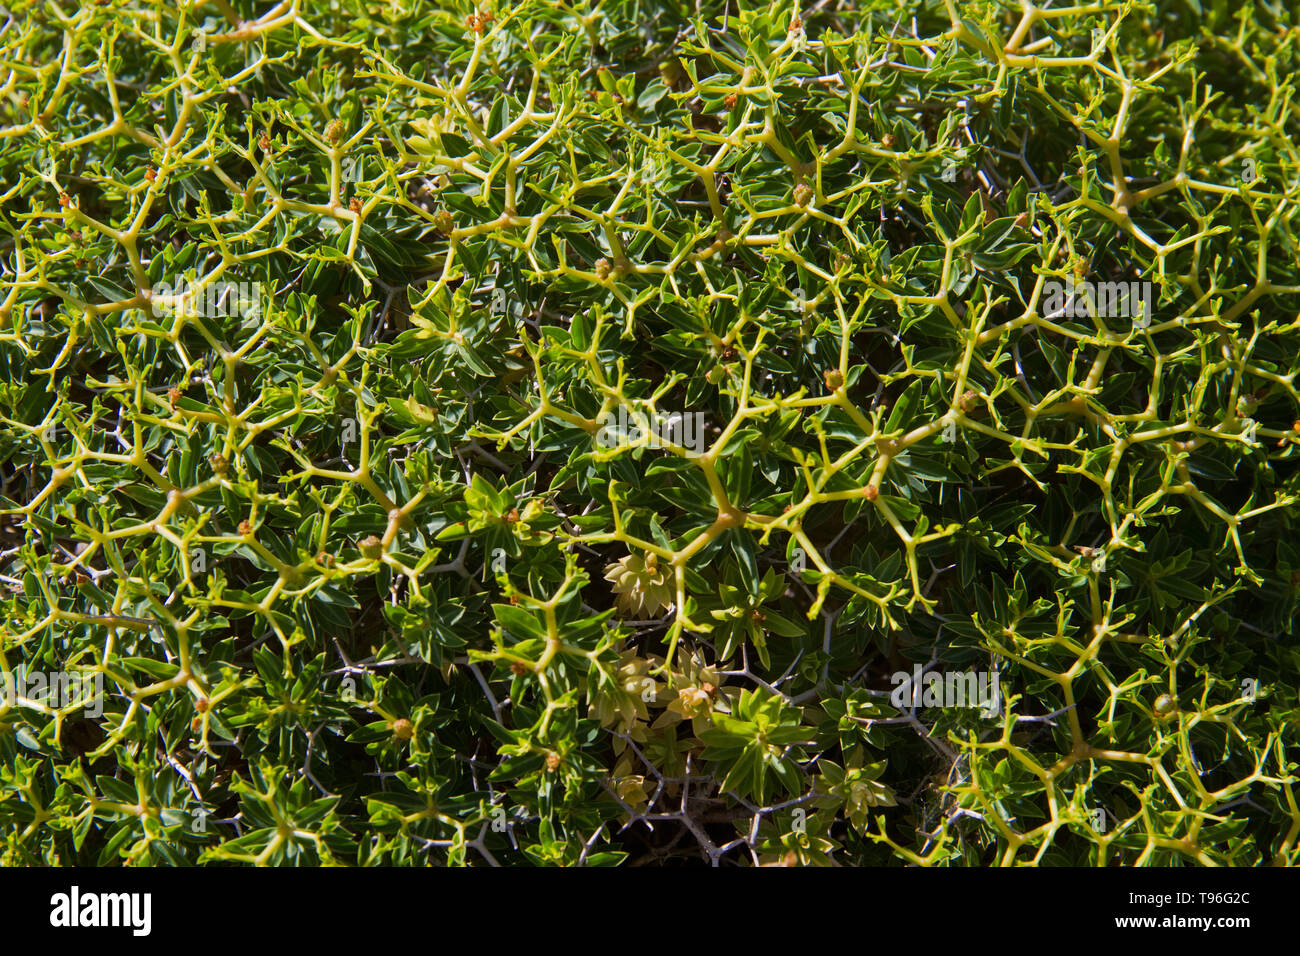 Close-up of Prickly burnet or Sarcopoterium spinosum Stock Photo